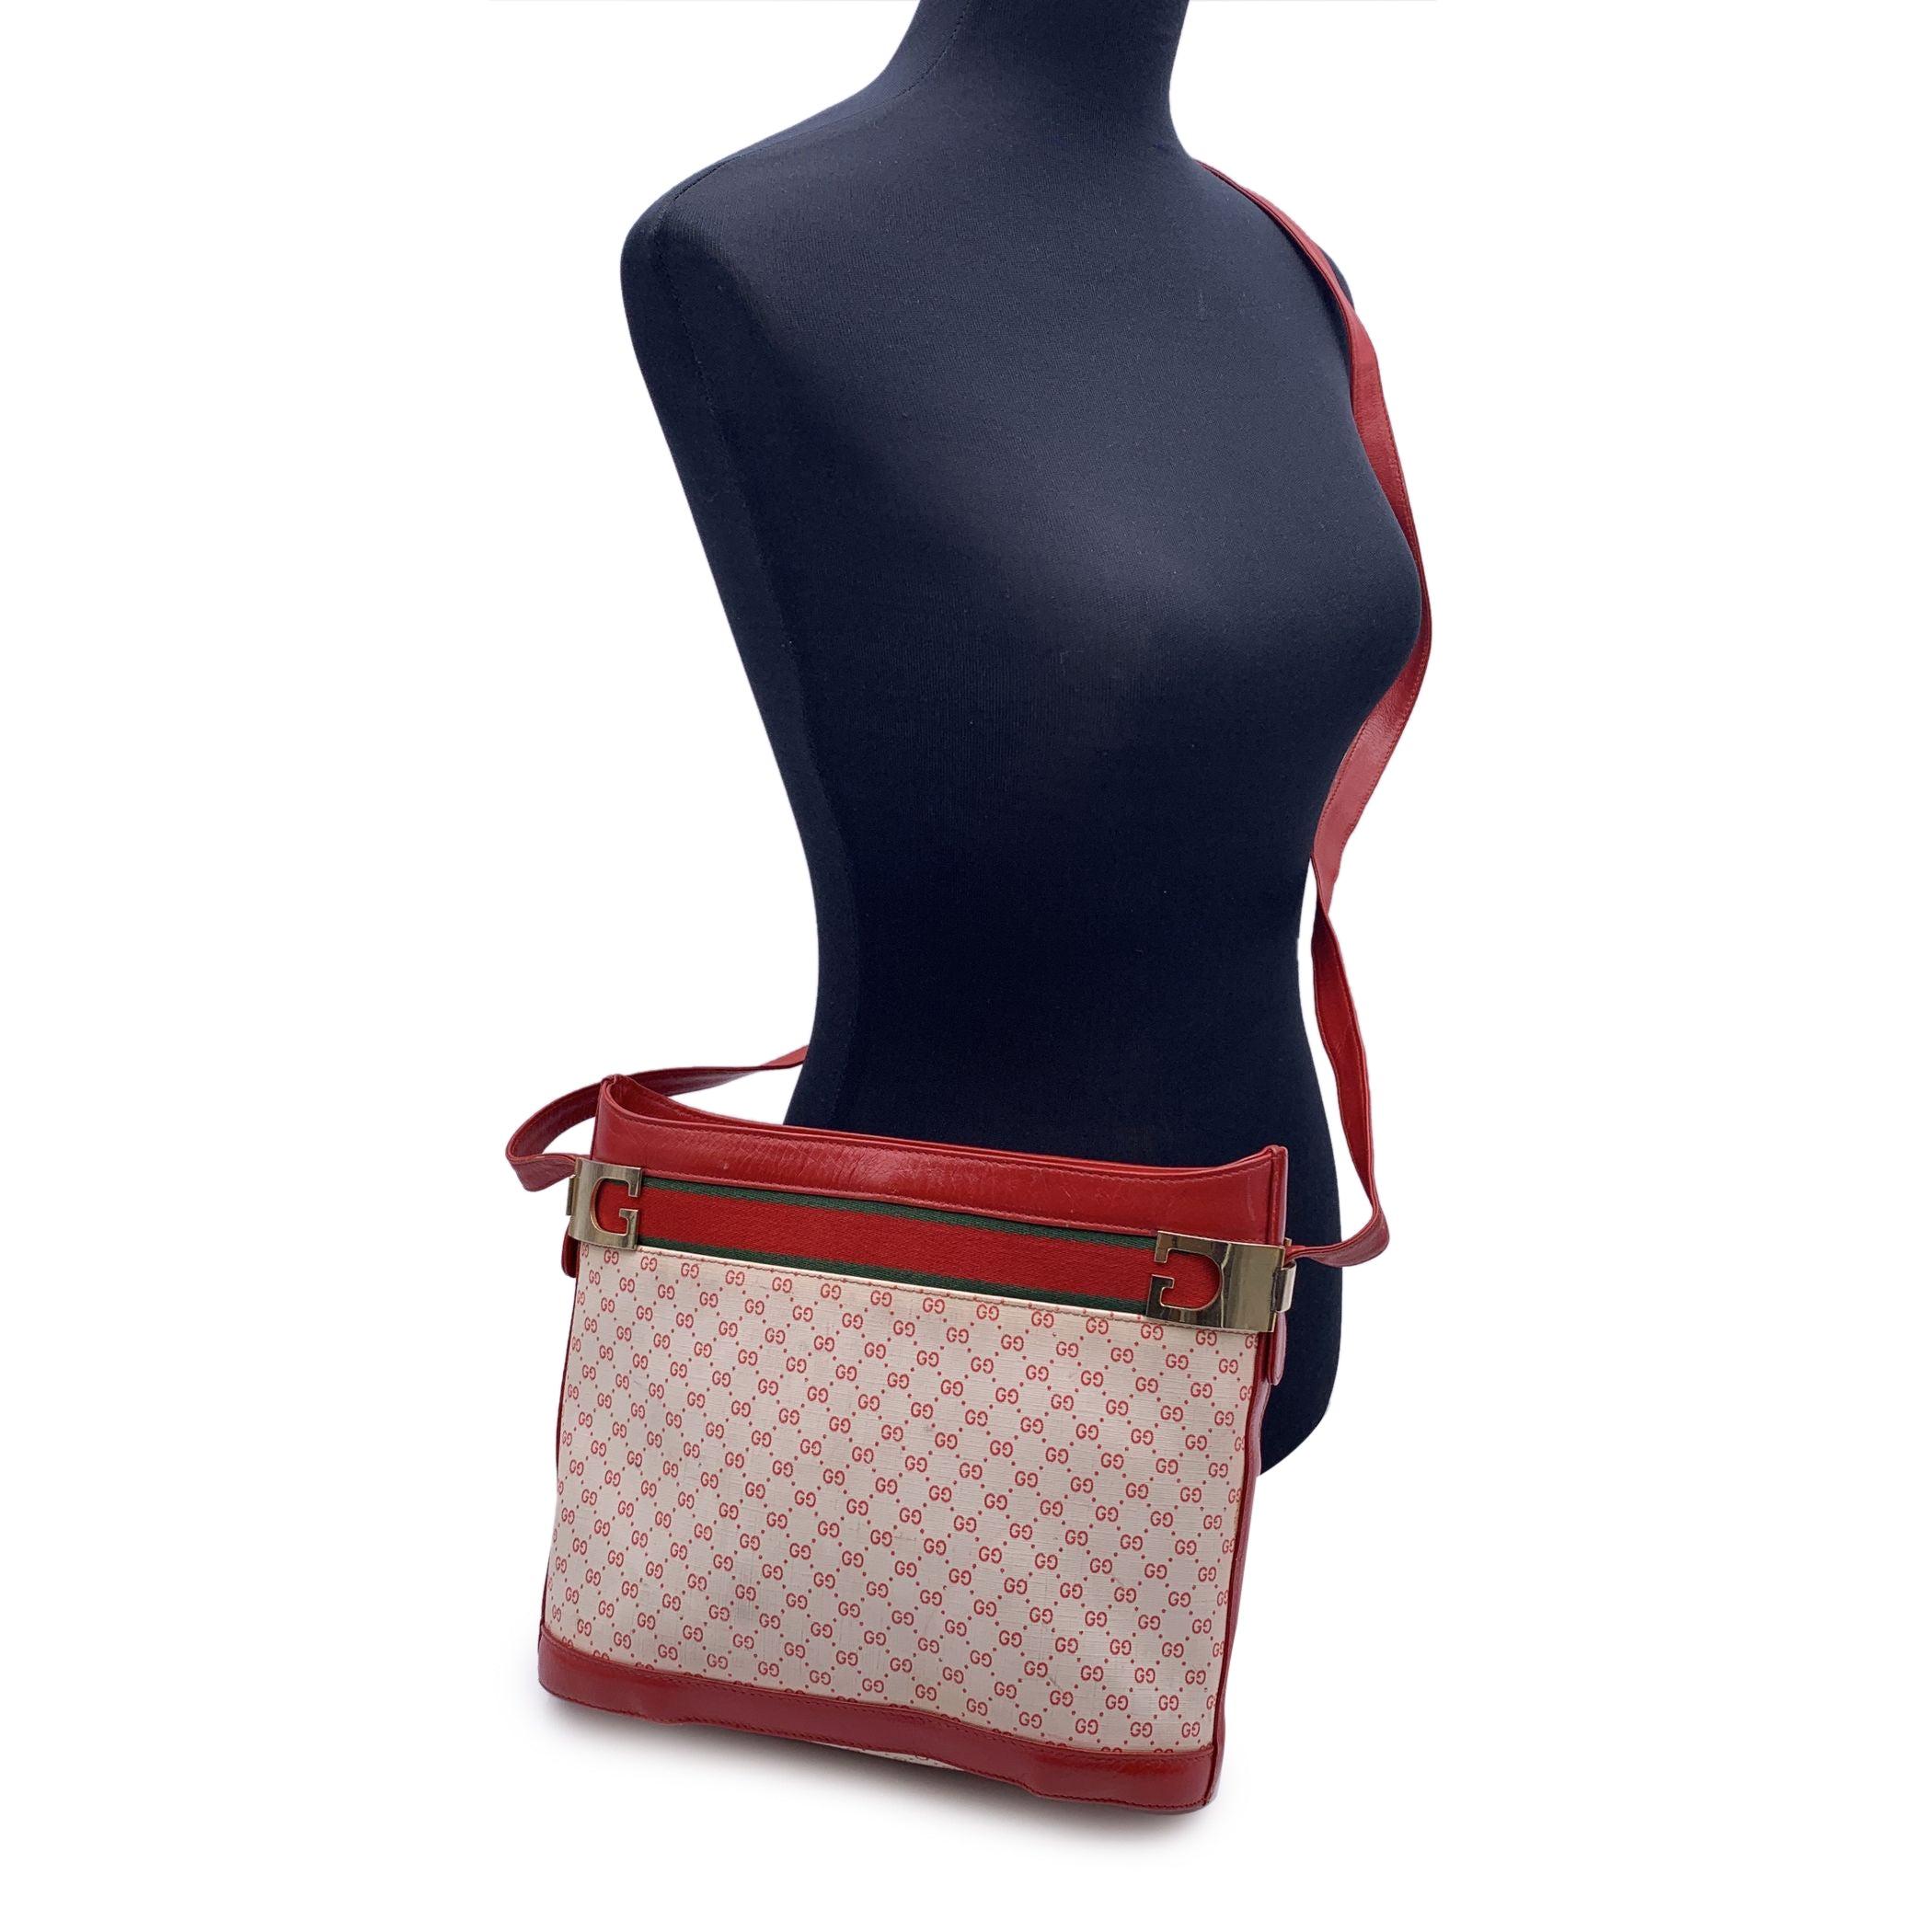 This beautiful Bag will come with a Certificate of Authenticity provided by Entrupy. The certificate will be provided at no further cost. Vintage Gucci bucket shoulder bag crafted in white and red monogram canvas with red genuine leather trim and